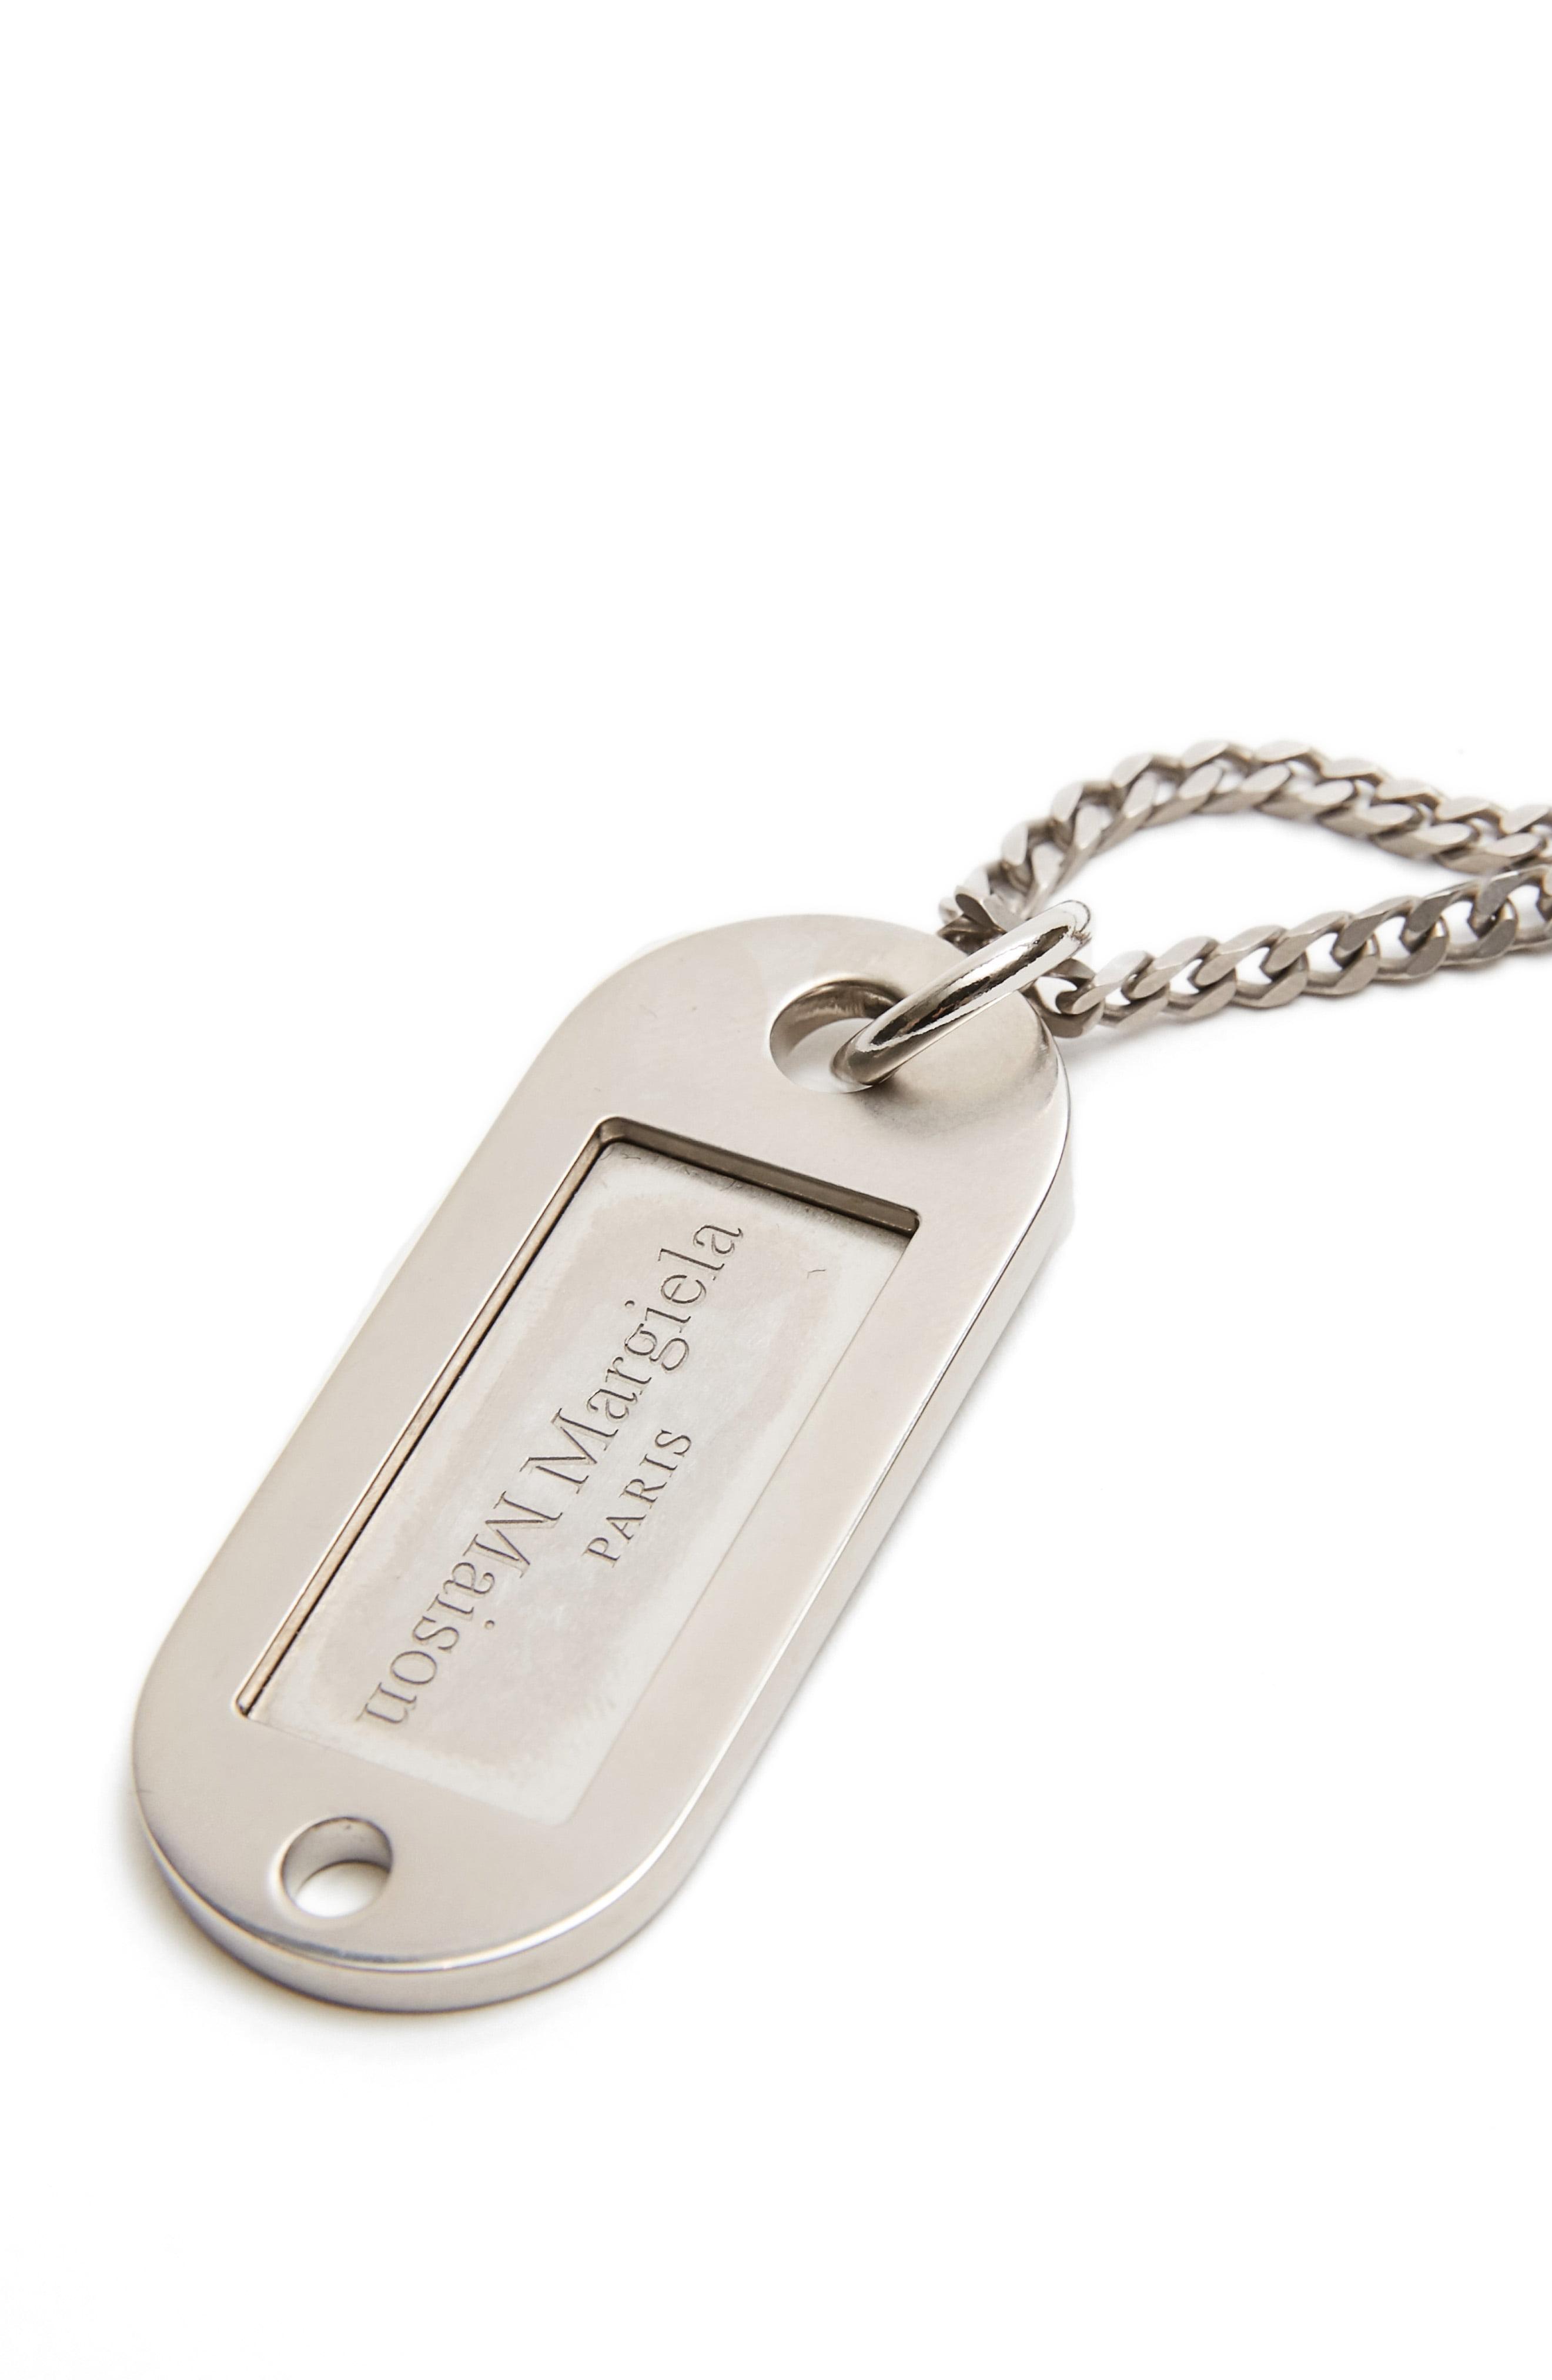 Maison Margiela Dog Tag Necklace in Silver (Metallic) for Men - Lyst